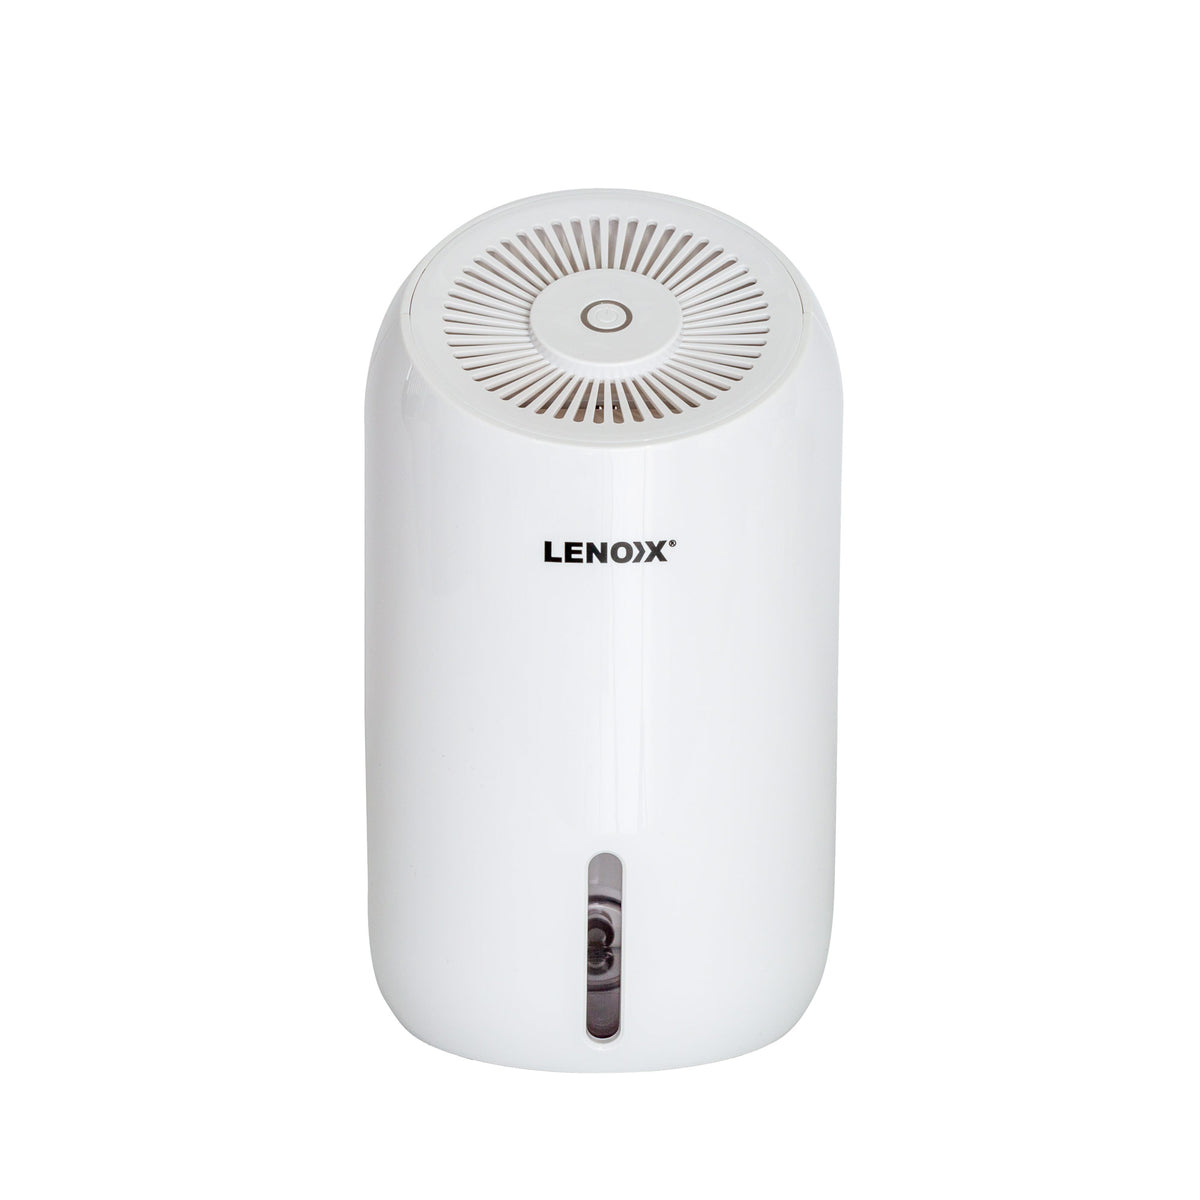 Front view of the white Thermo-Electric Peltier Dehumidifier with Lenoxx logo.